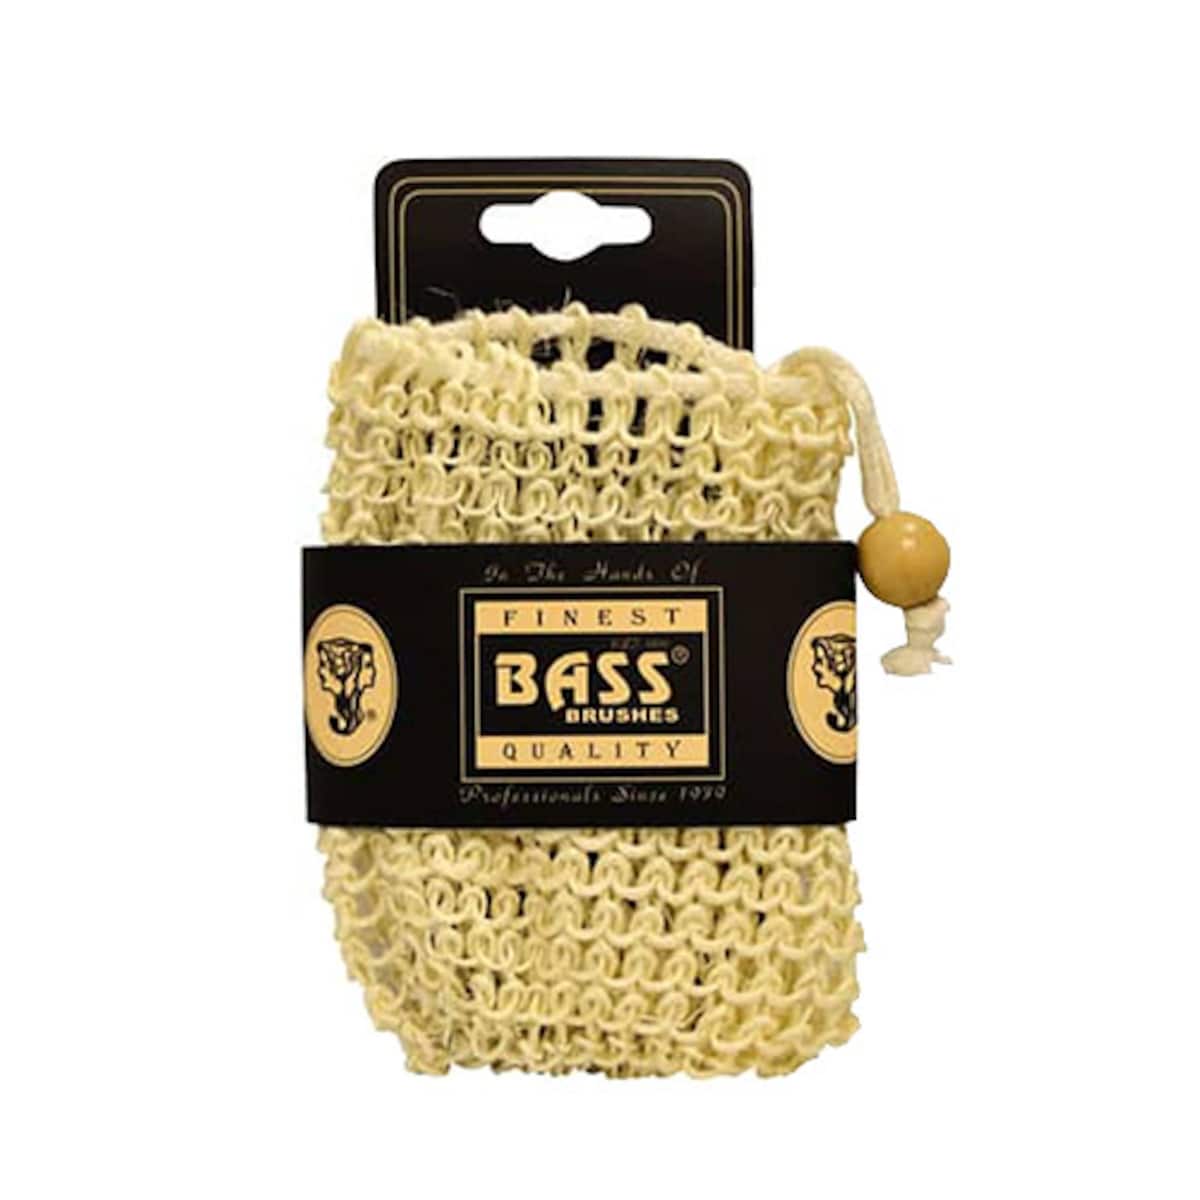 Bass Body Care Sisal Soap Holder Pouch With Drawstring Firm